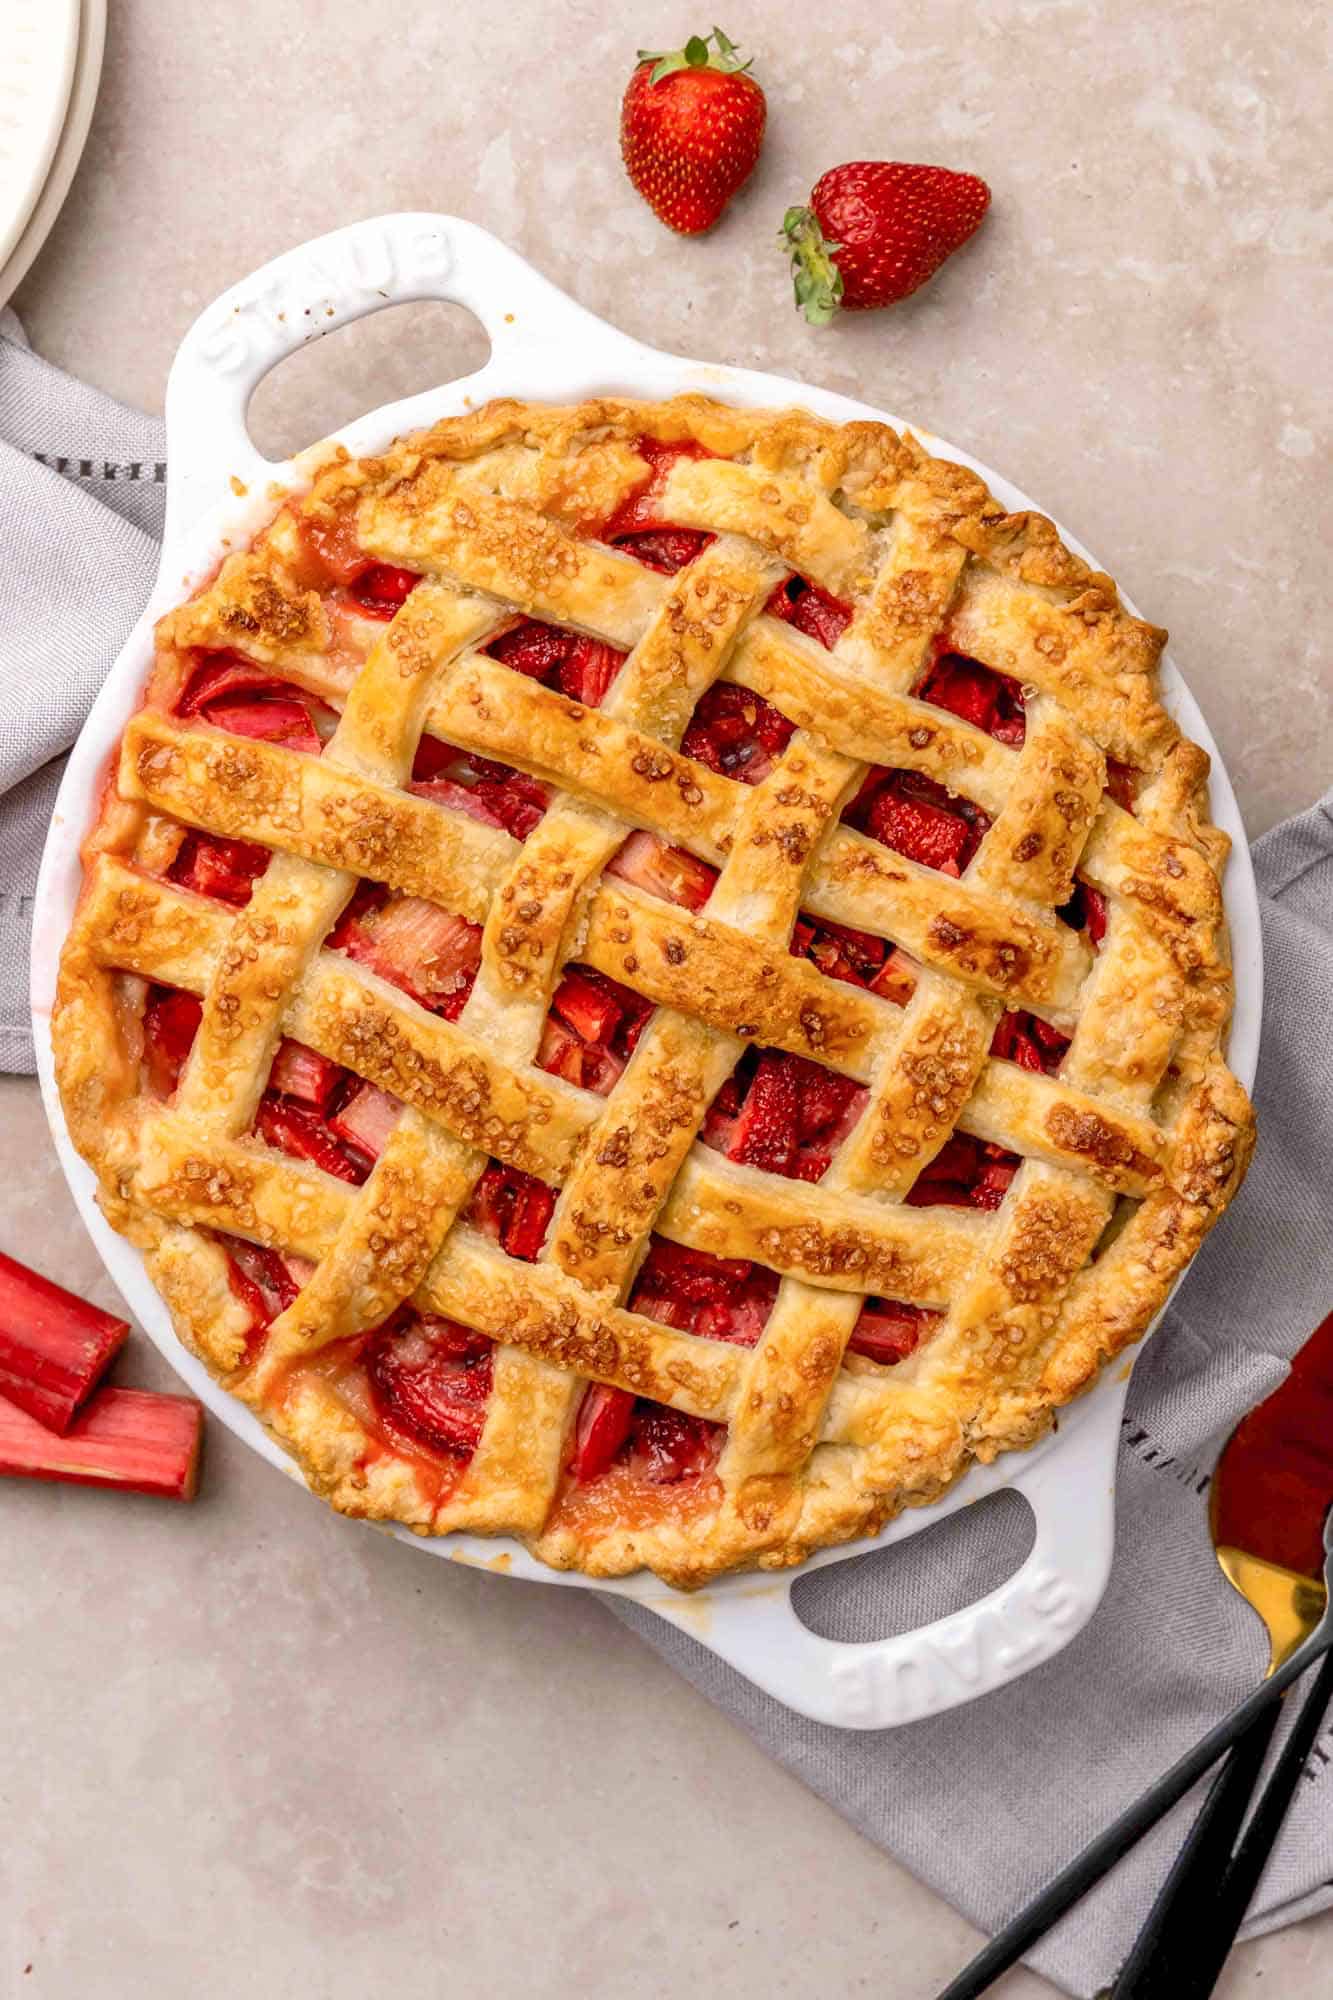 A Strawberry Rhubarb Pie in a white baking dish
